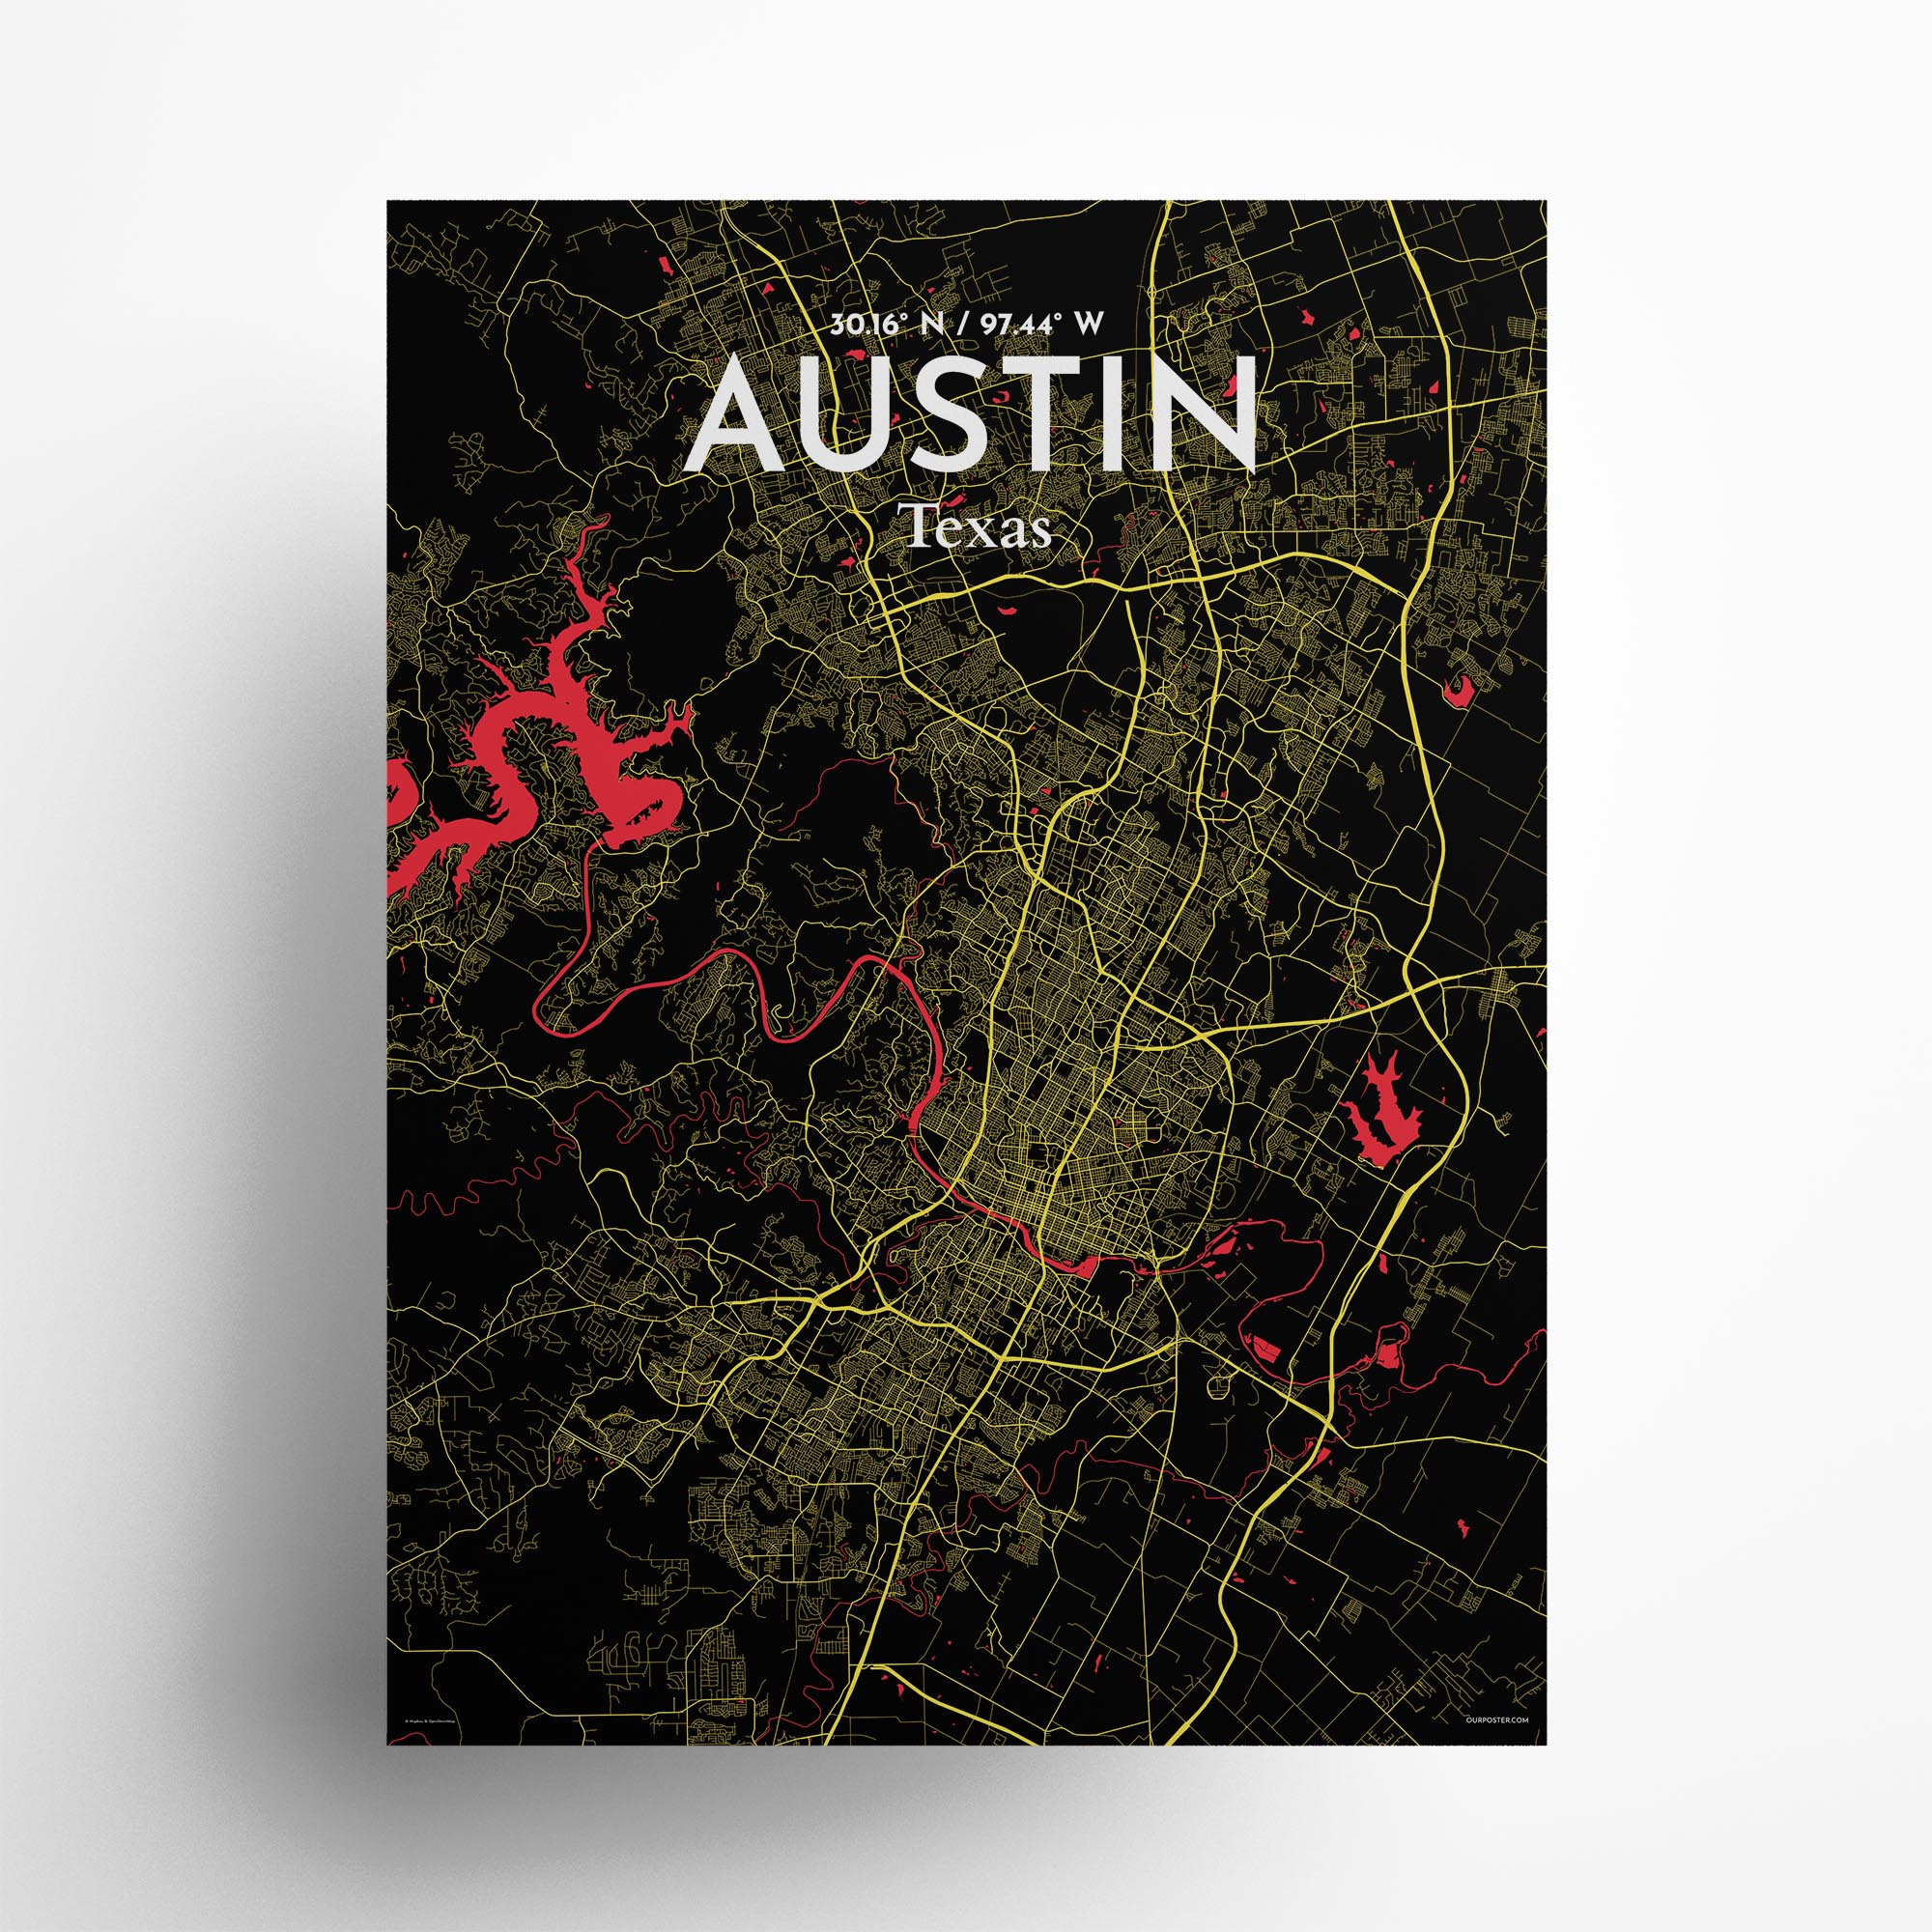 Austin city map poster in Contrast of size 18" x 24"